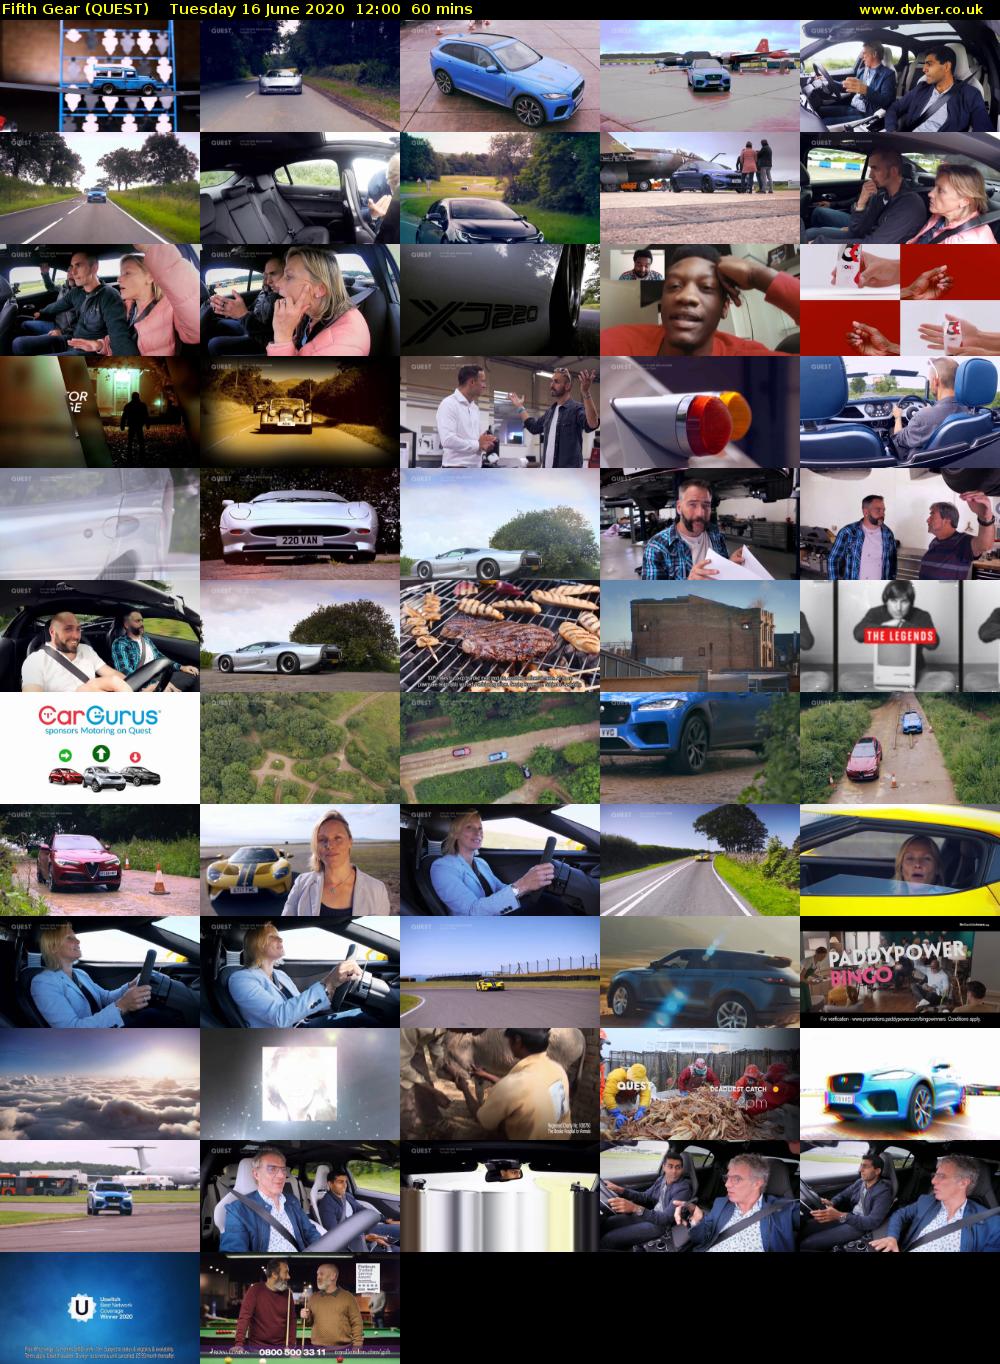 Fifth Gear (QUEST) Tuesday 16 June 2020 12:00 - 13:00